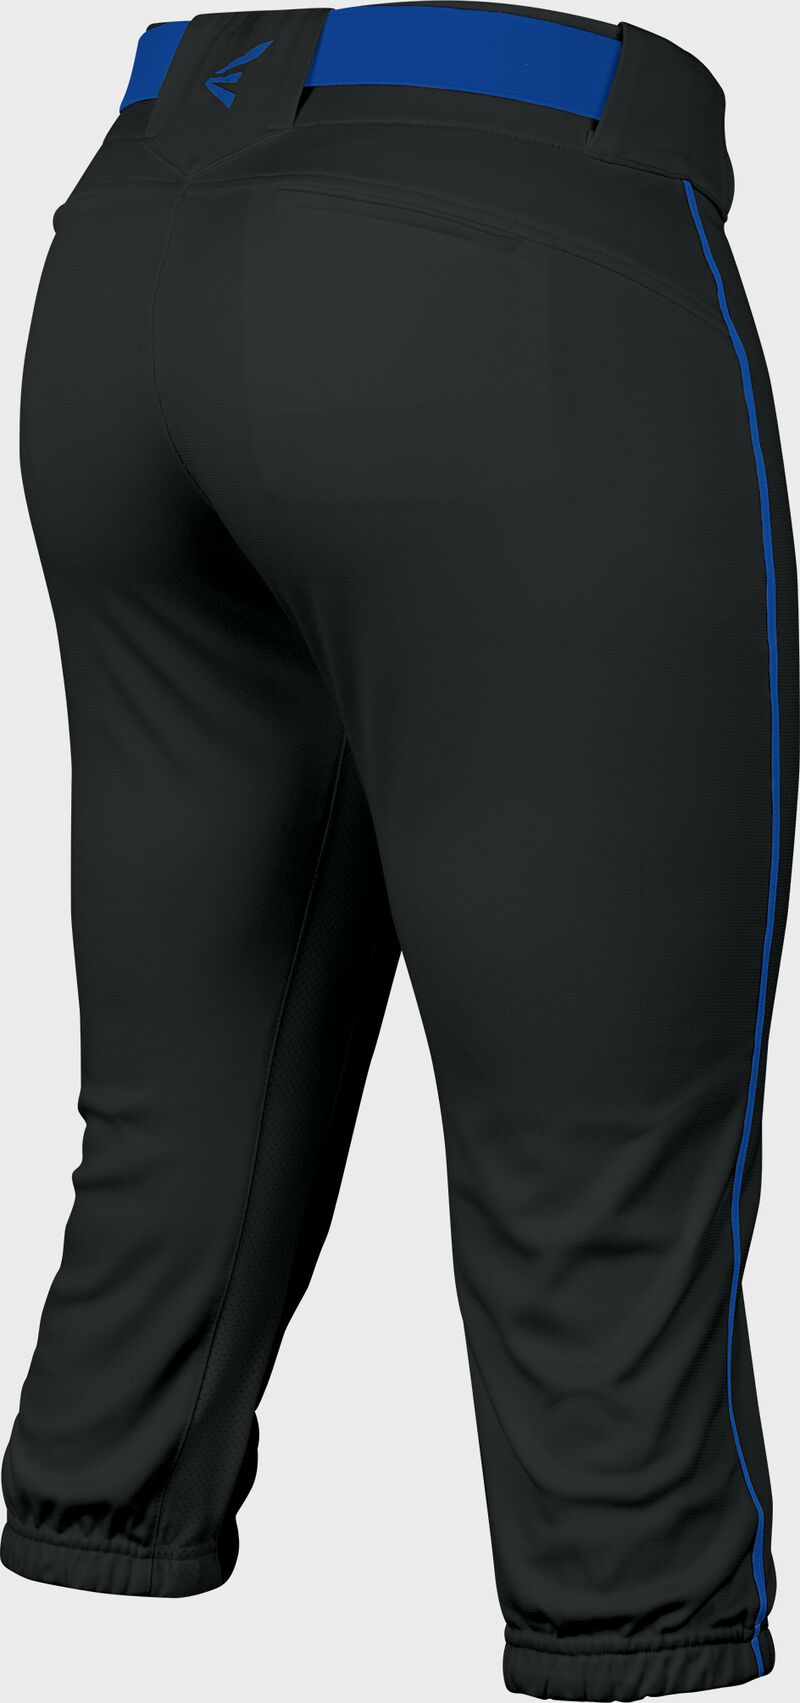 Easton Prowess Softball Pant Women's Piped BLACK/ROYAL M